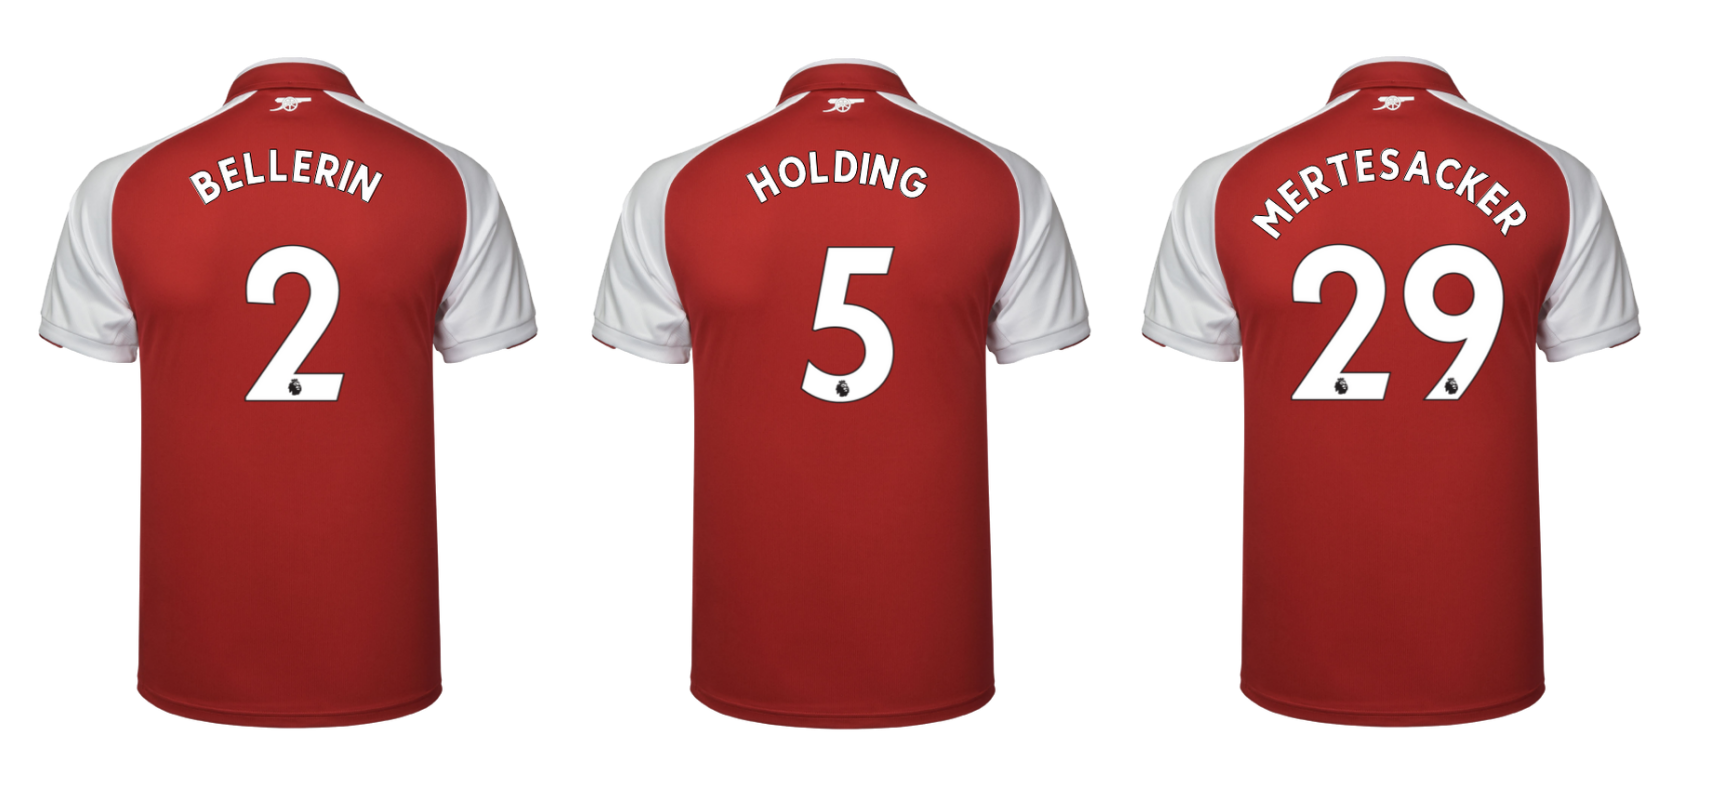 arsenal jersey numbers